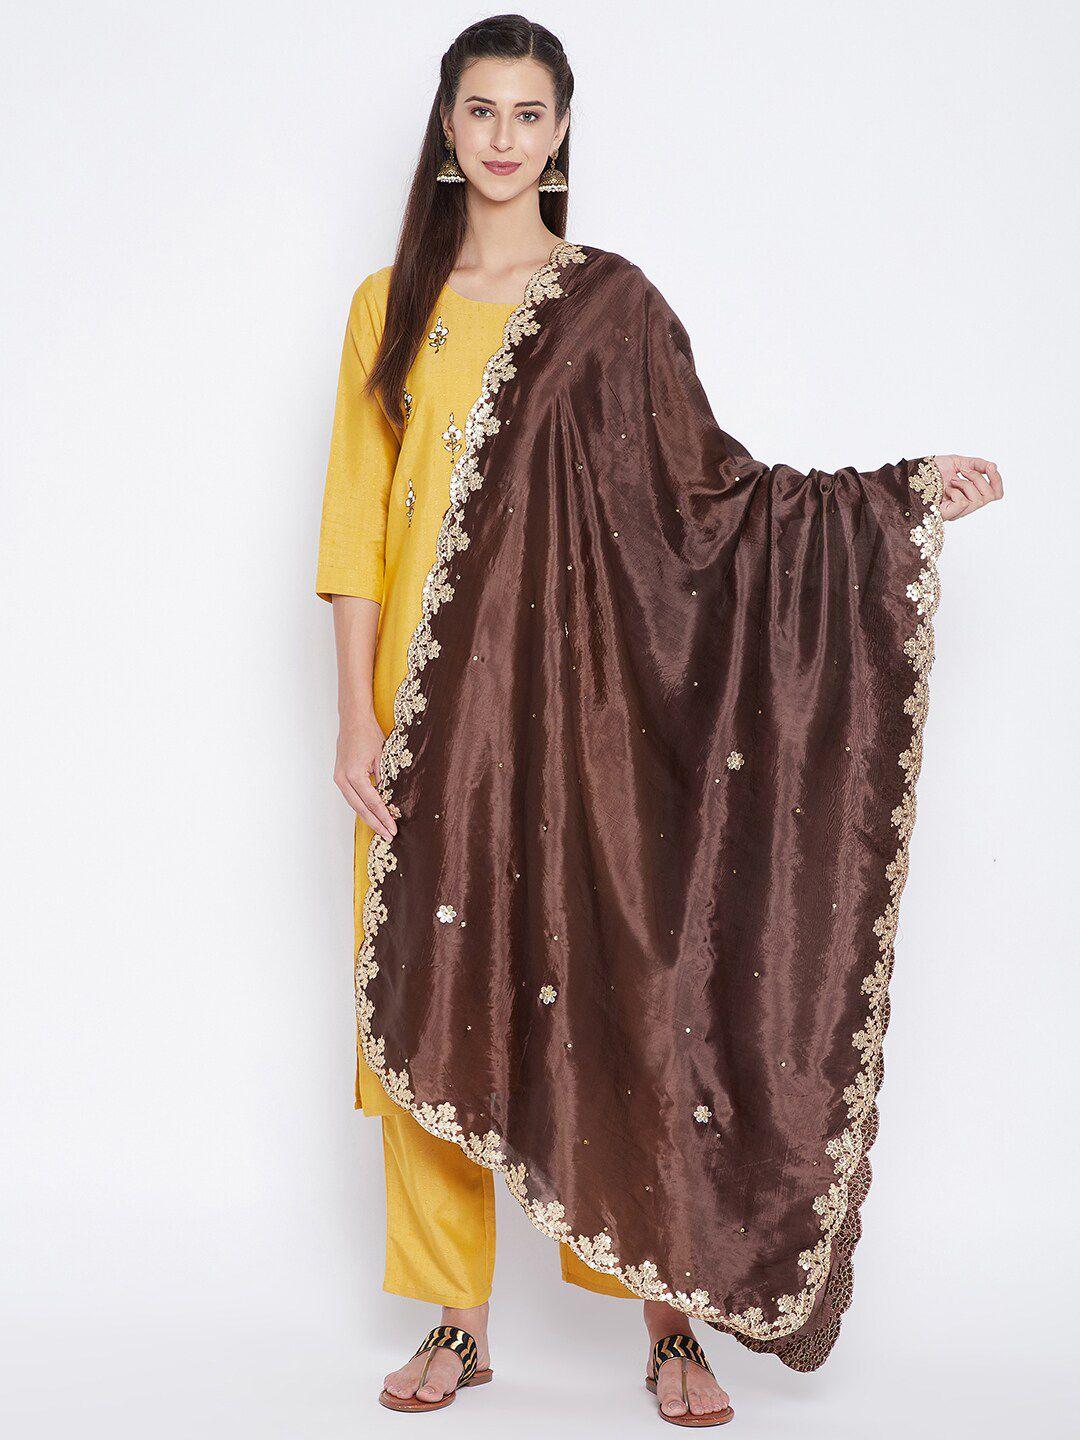 clora-creation-brown-&-gold-toned-embroidered-dupatta-with-gotta-patti